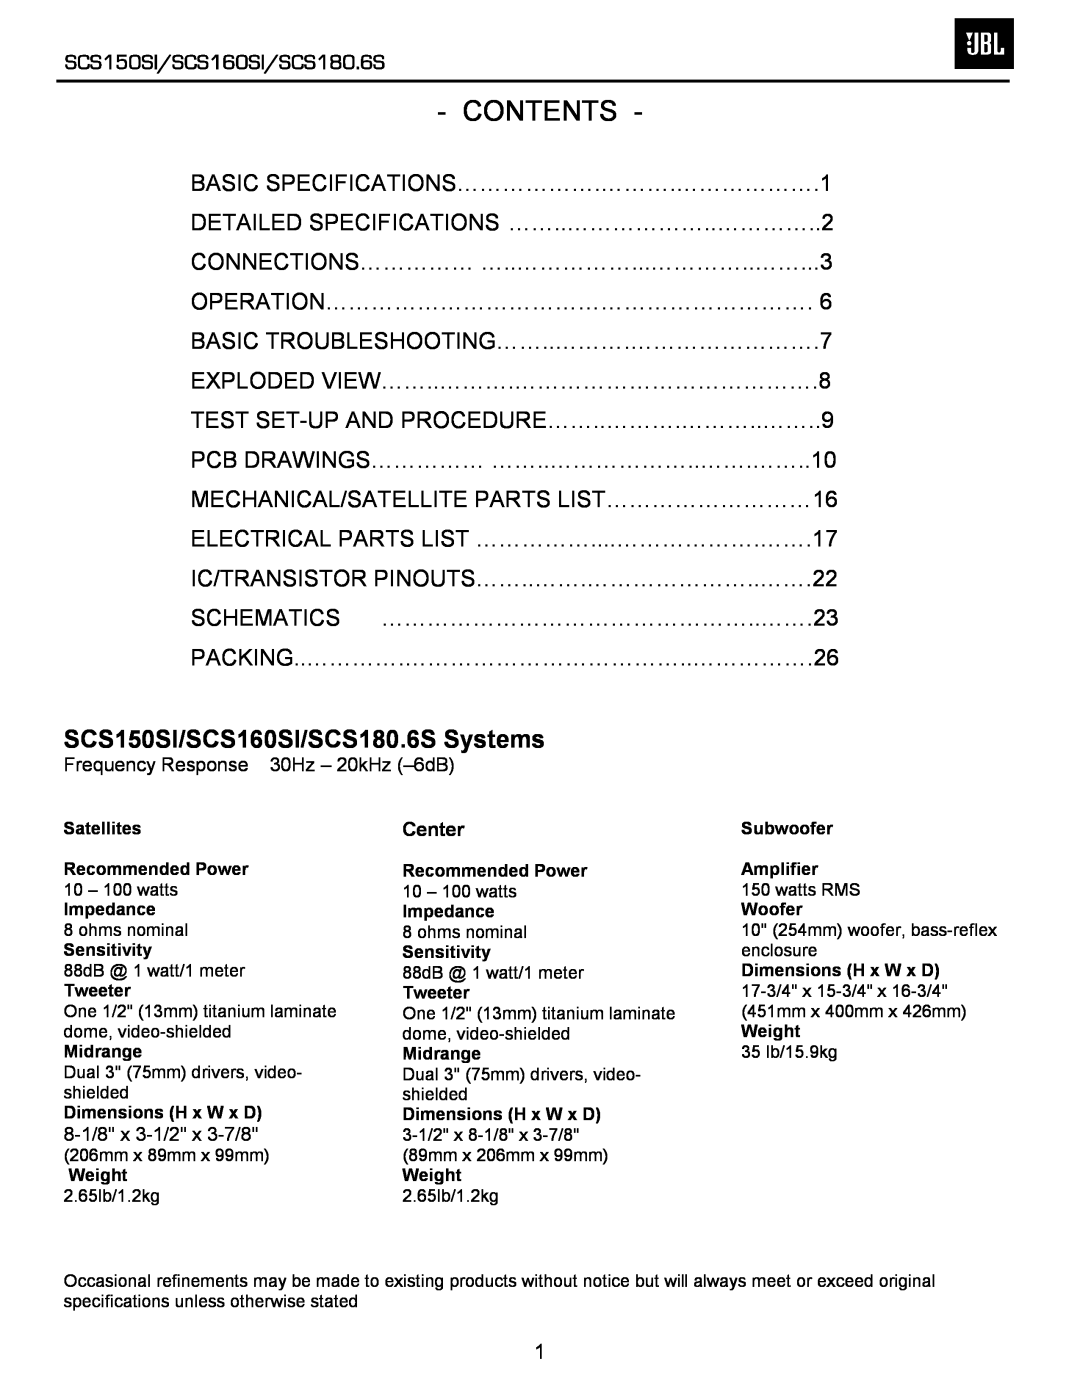 JBL service manual Contents, SCS150SI/SCS160SI/SCS180.6S Systems 